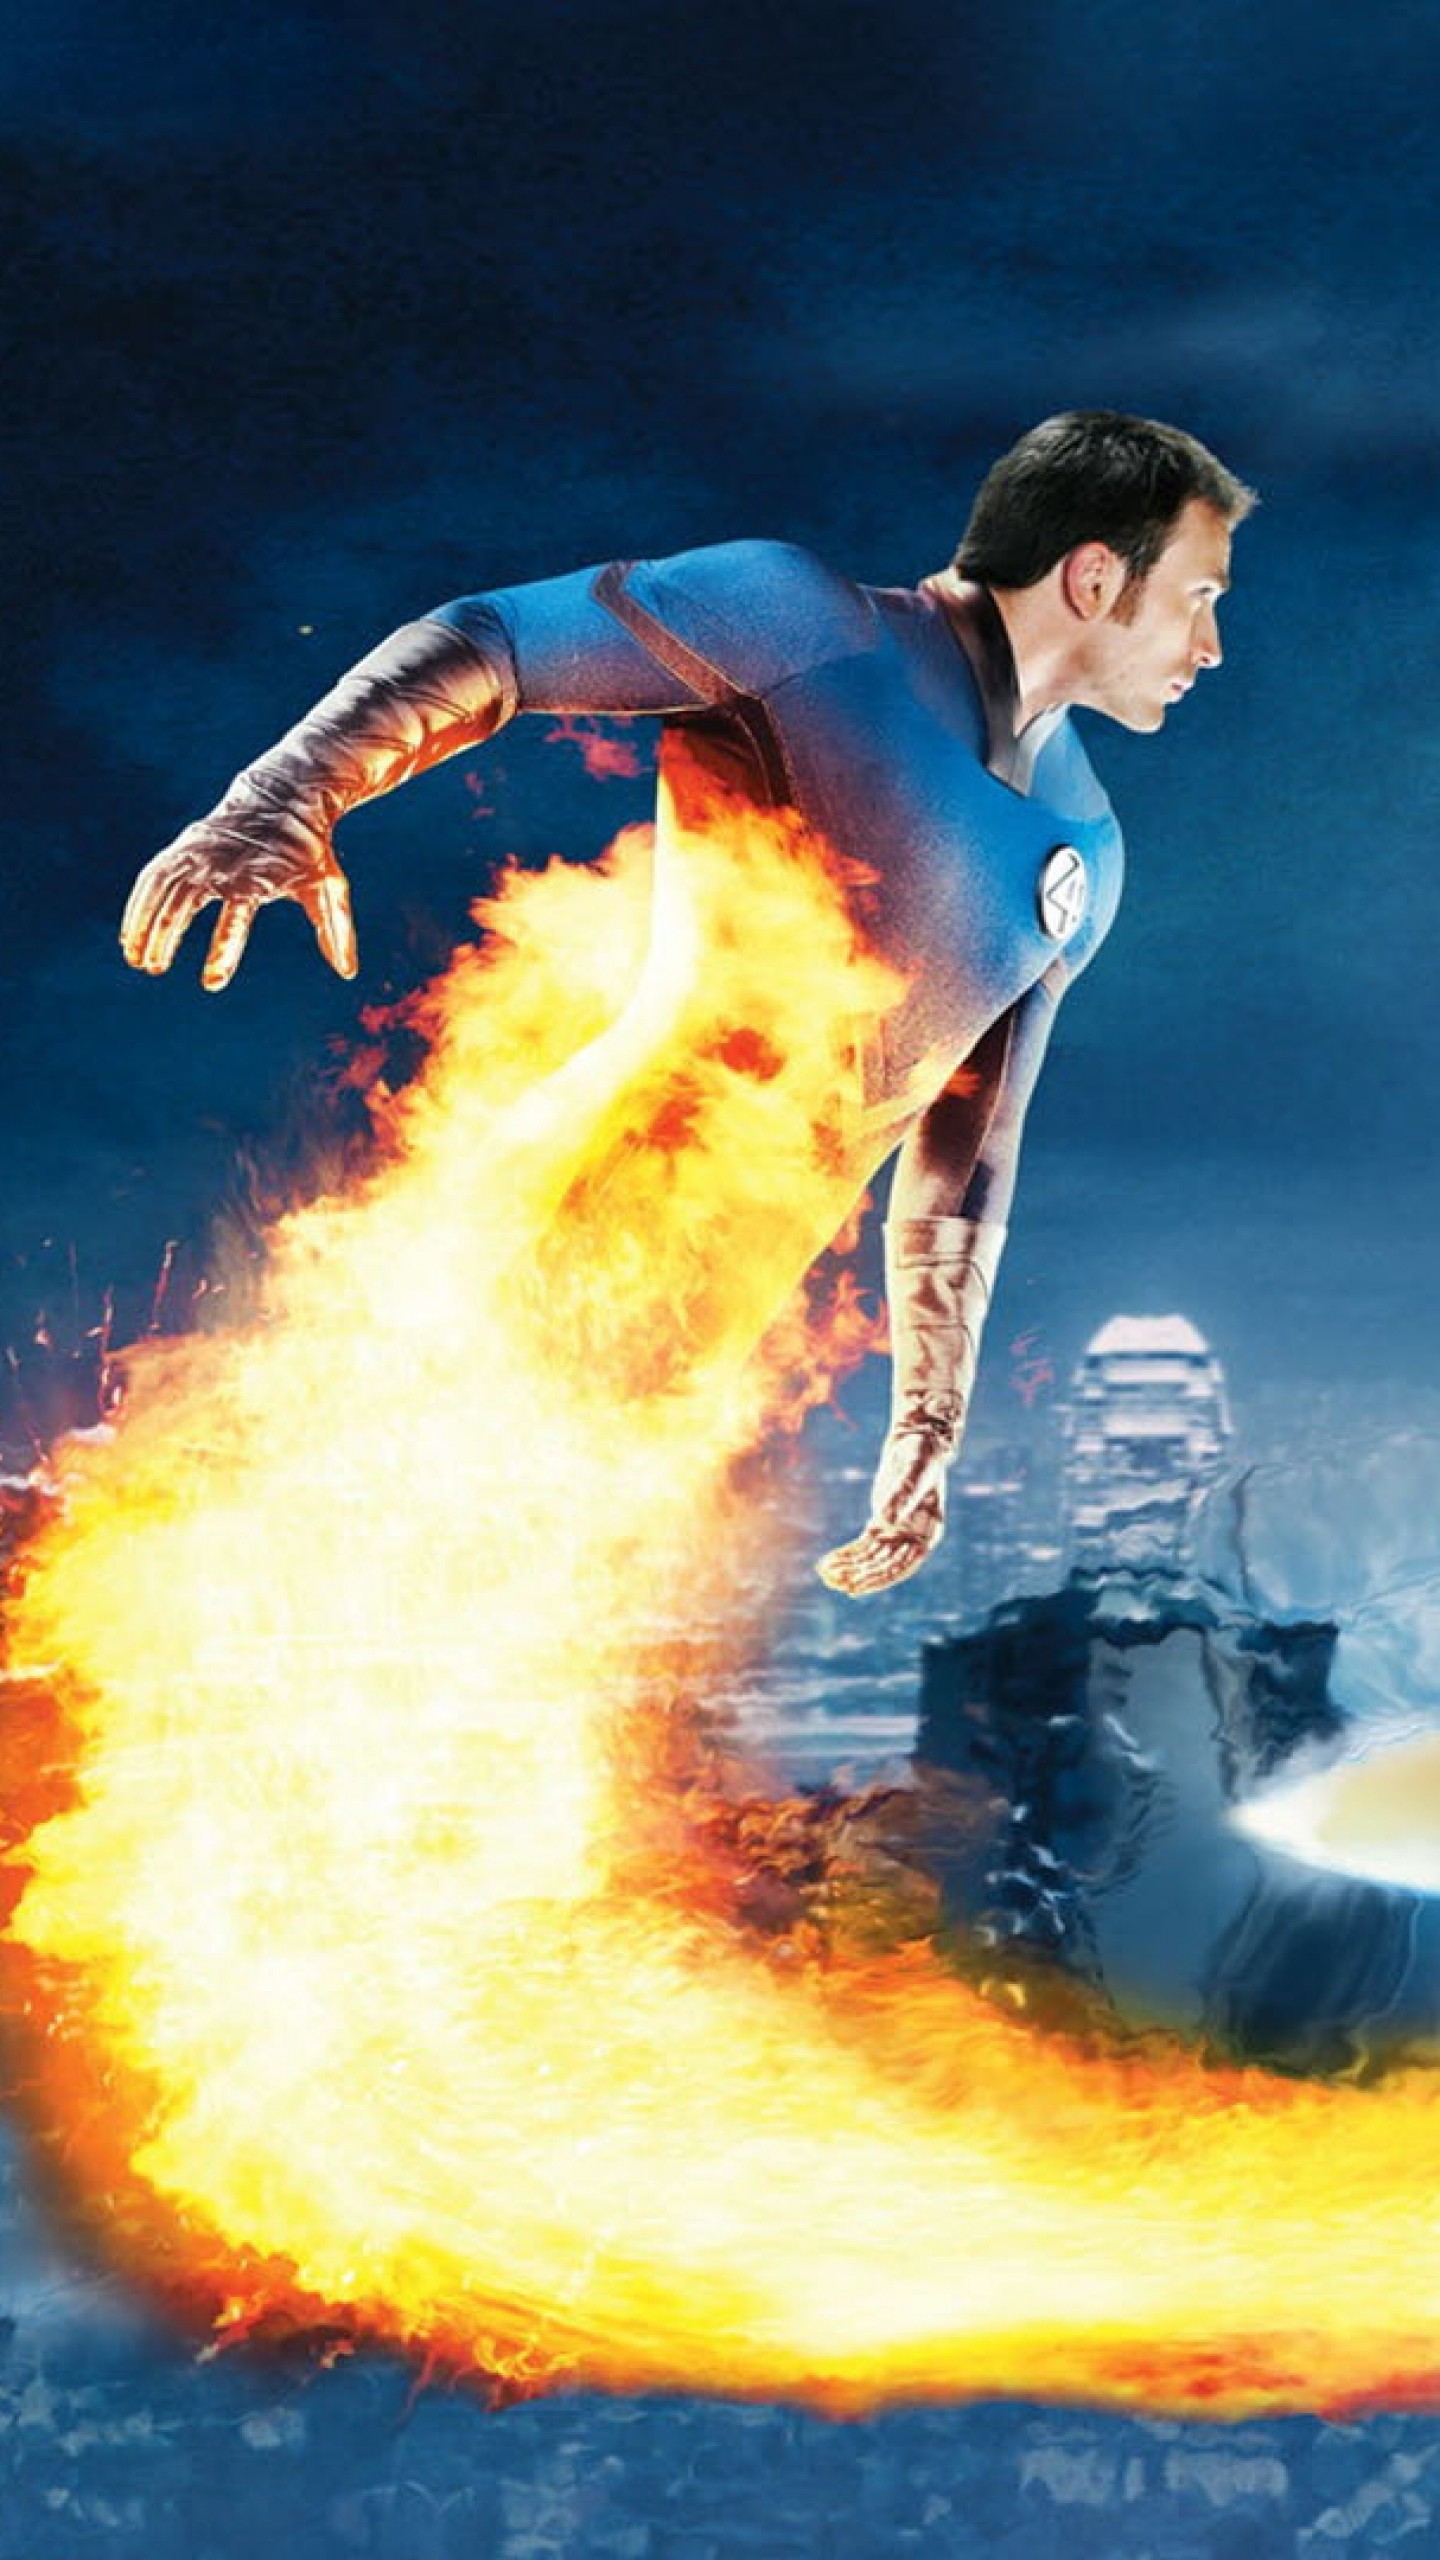 Wallpaper fantastic 4, rise of the silver surfer, chris evans, human torch